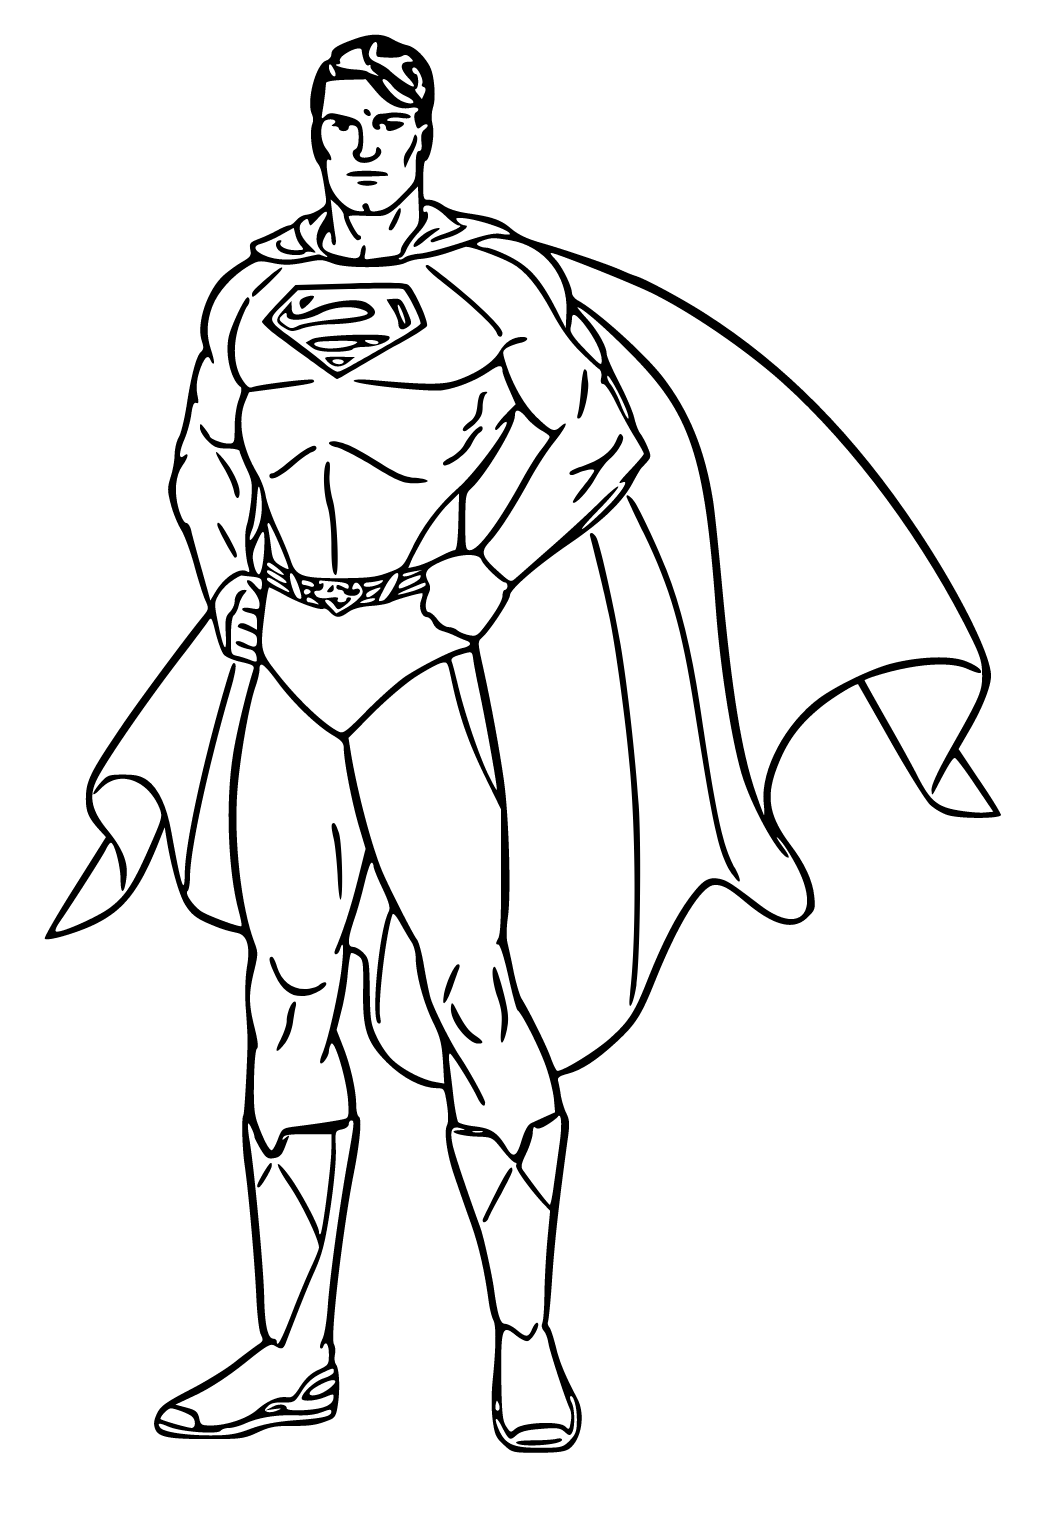 22+ Free Superman Coloring Pages